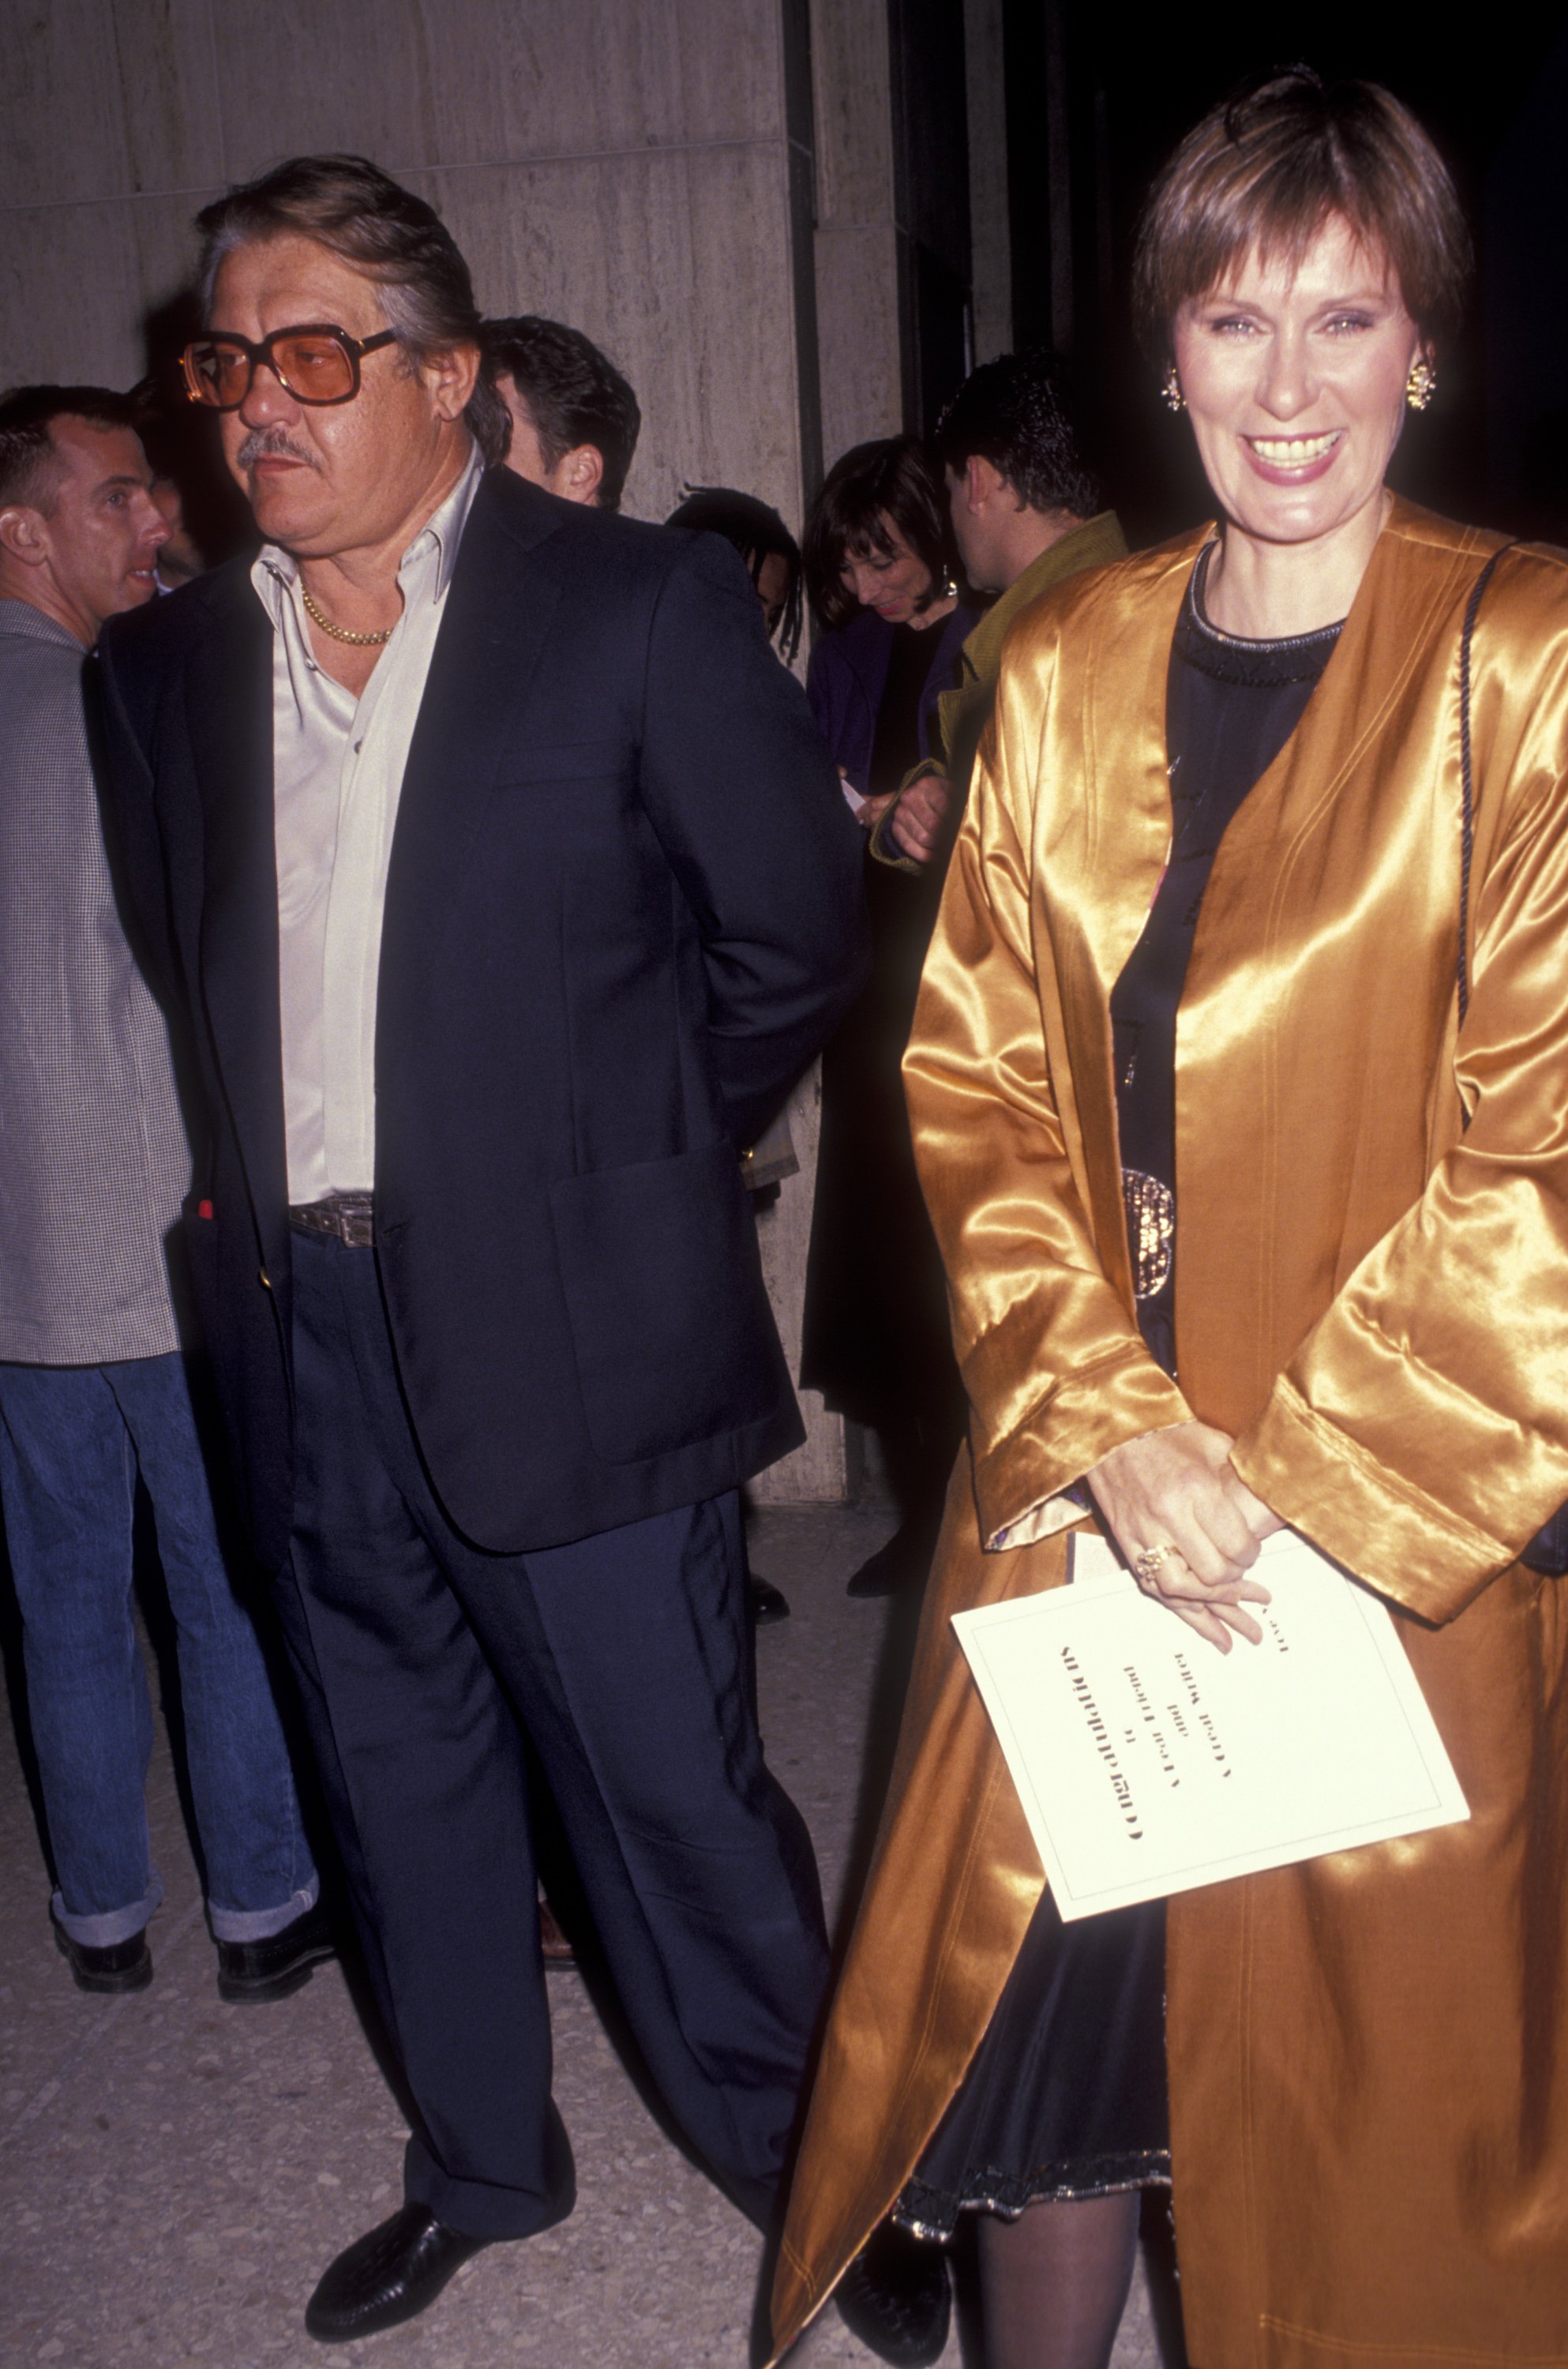  Actor Alex Karras and actress Susan Clark attend the premiere of "City Of Angels" on June 5, 1991 at the Shubert Theater in Century City, California | Source: Getty Images